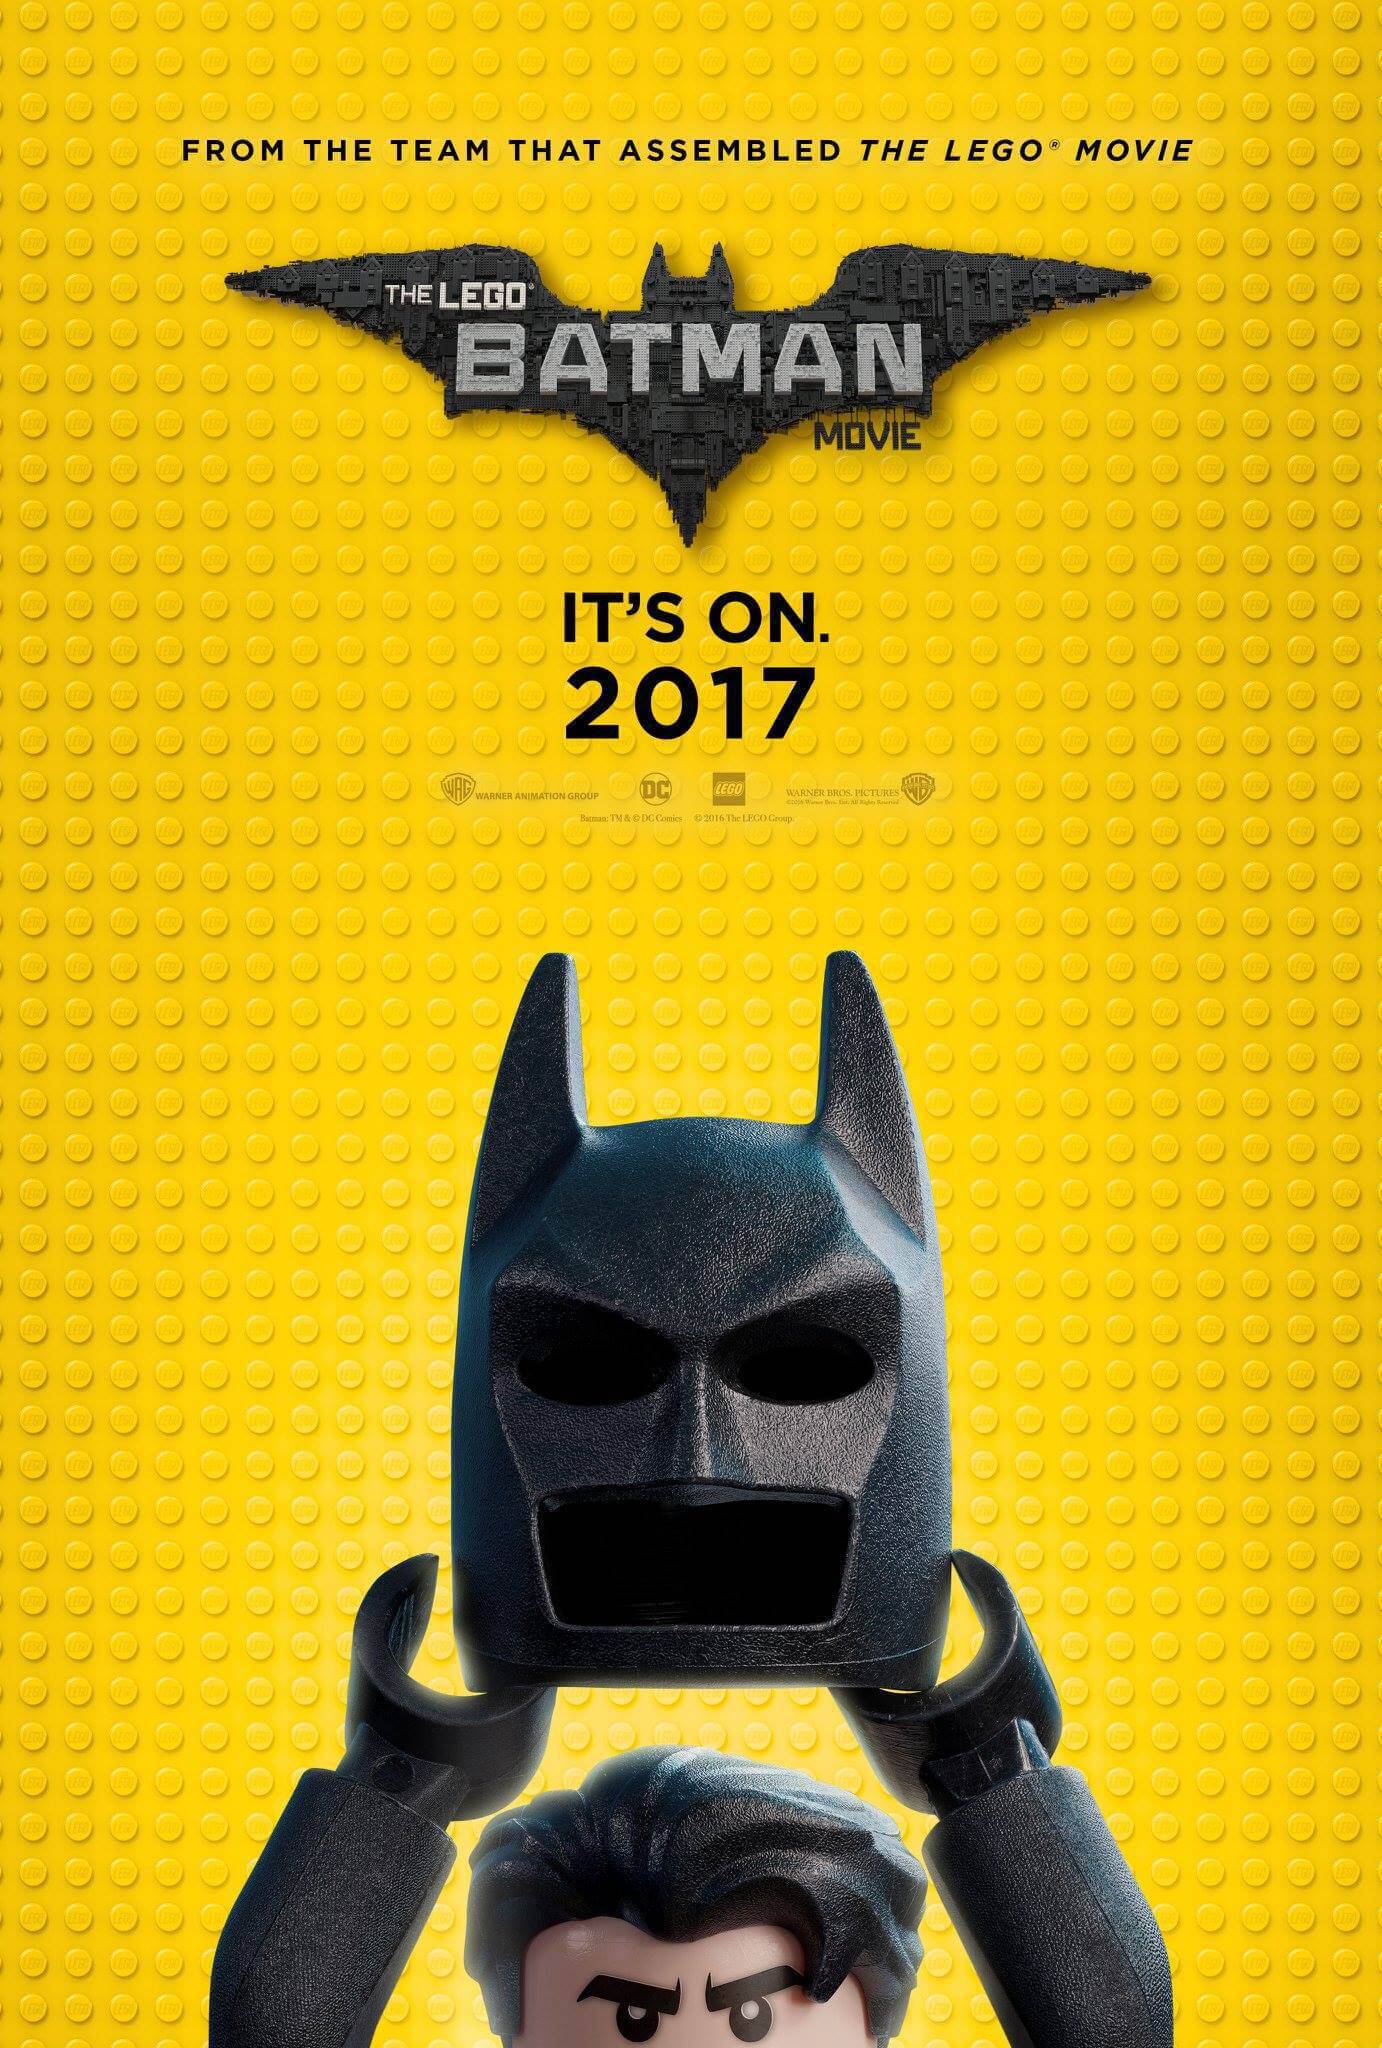 The Lego Batman Movie: New Trailer debuts at SDCC - Skwigly Animation  Magazine